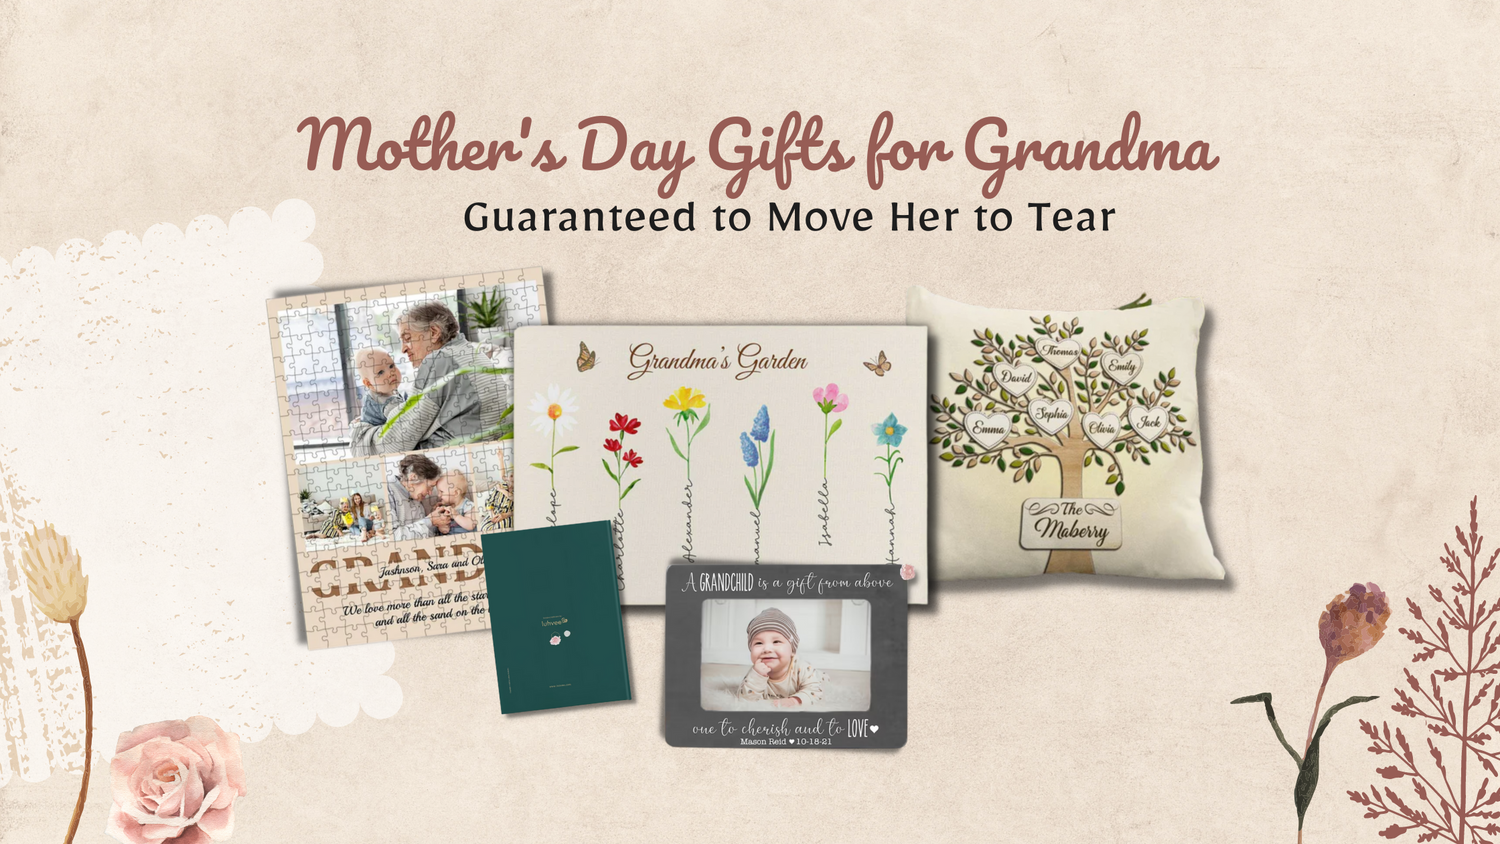 21+ Thoughtful Mothers Day Gifts for Grandma Guaranteed to Move Her to Tear (2022) - FamiPrints | Trending Customizable Family Gifts